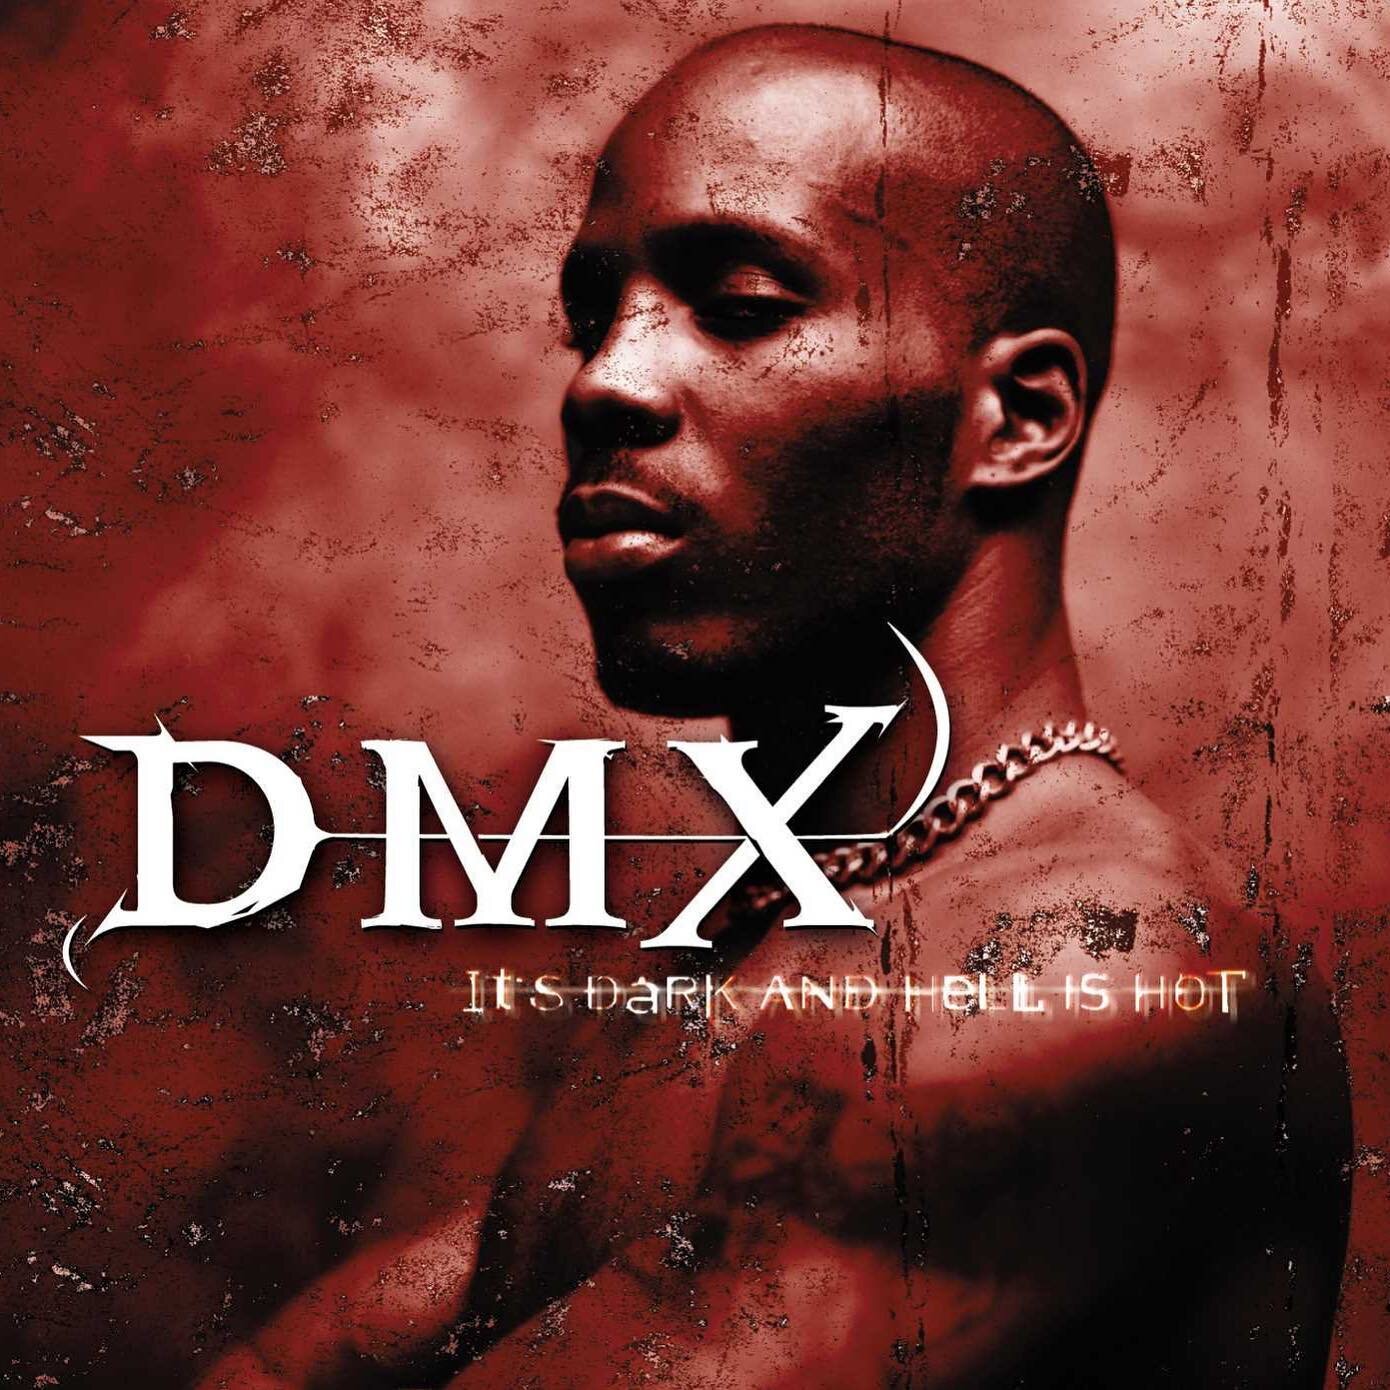 I still remember the first time I got this album. I begged my parents to buy this for me at Christmas. That year I got a JVC boom box, Jay-Z vol. 2 and DMX&rsquo;s debut album. I literally listened to this album until the cd broke. The album cover do